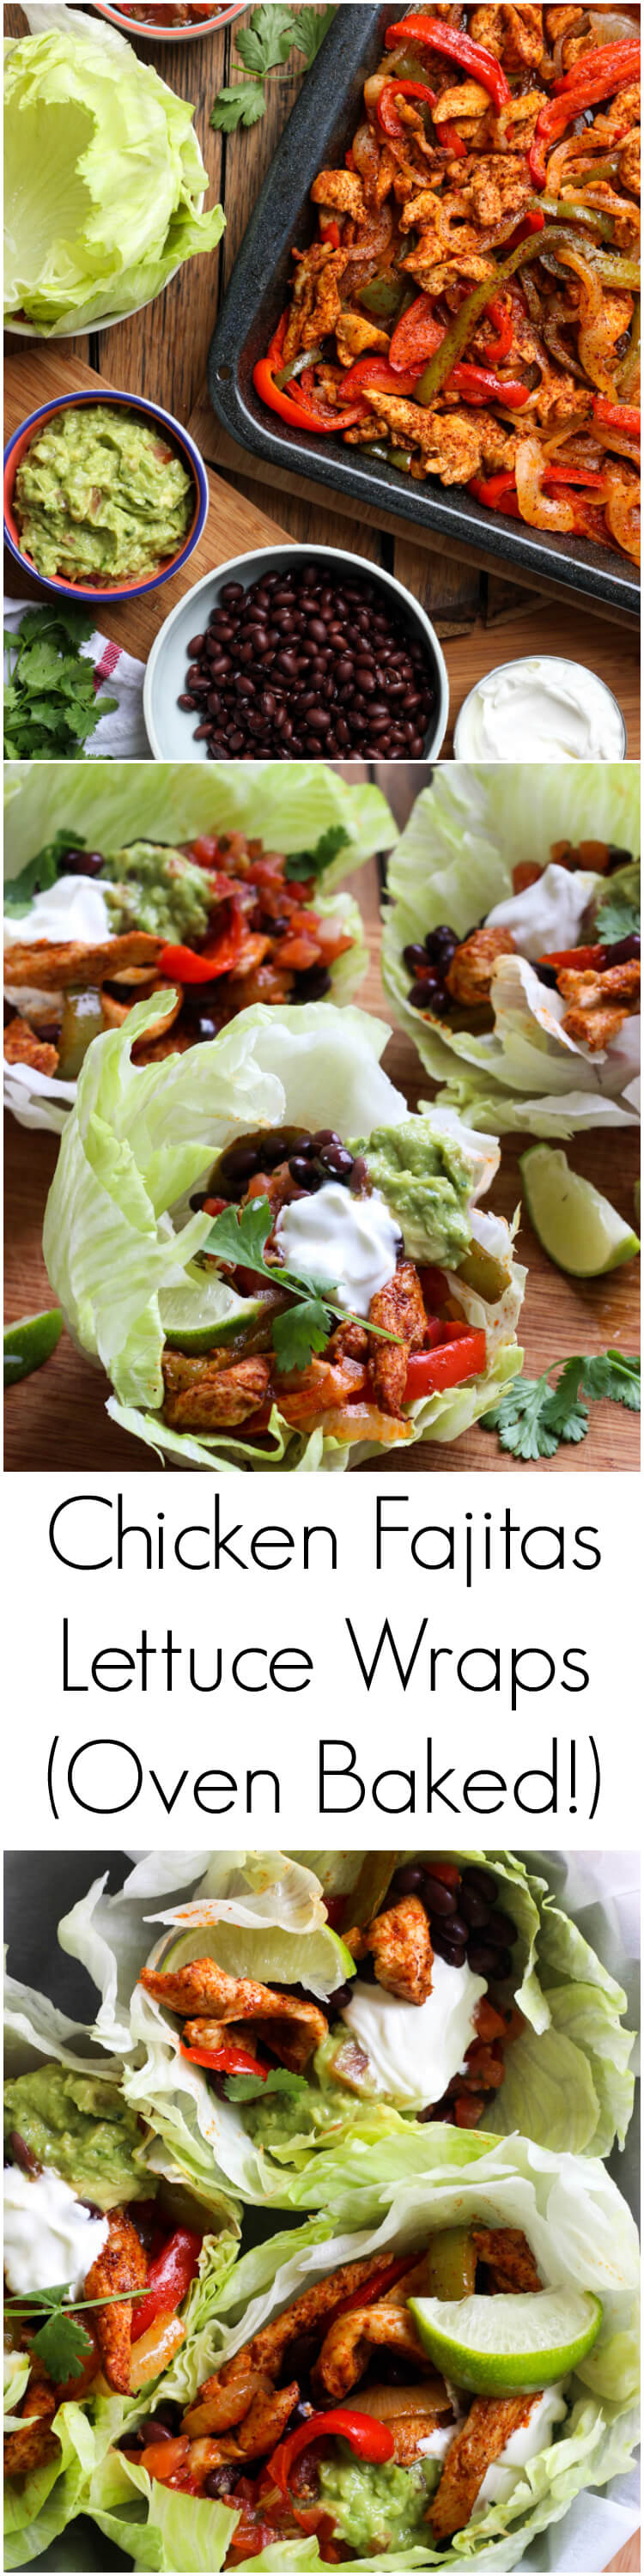 With one little trick and you have the most juiciest oven baked chicken fajitas! Served in a lettuce wrap for a healthy dinner | littlebroken.com @littlebroken